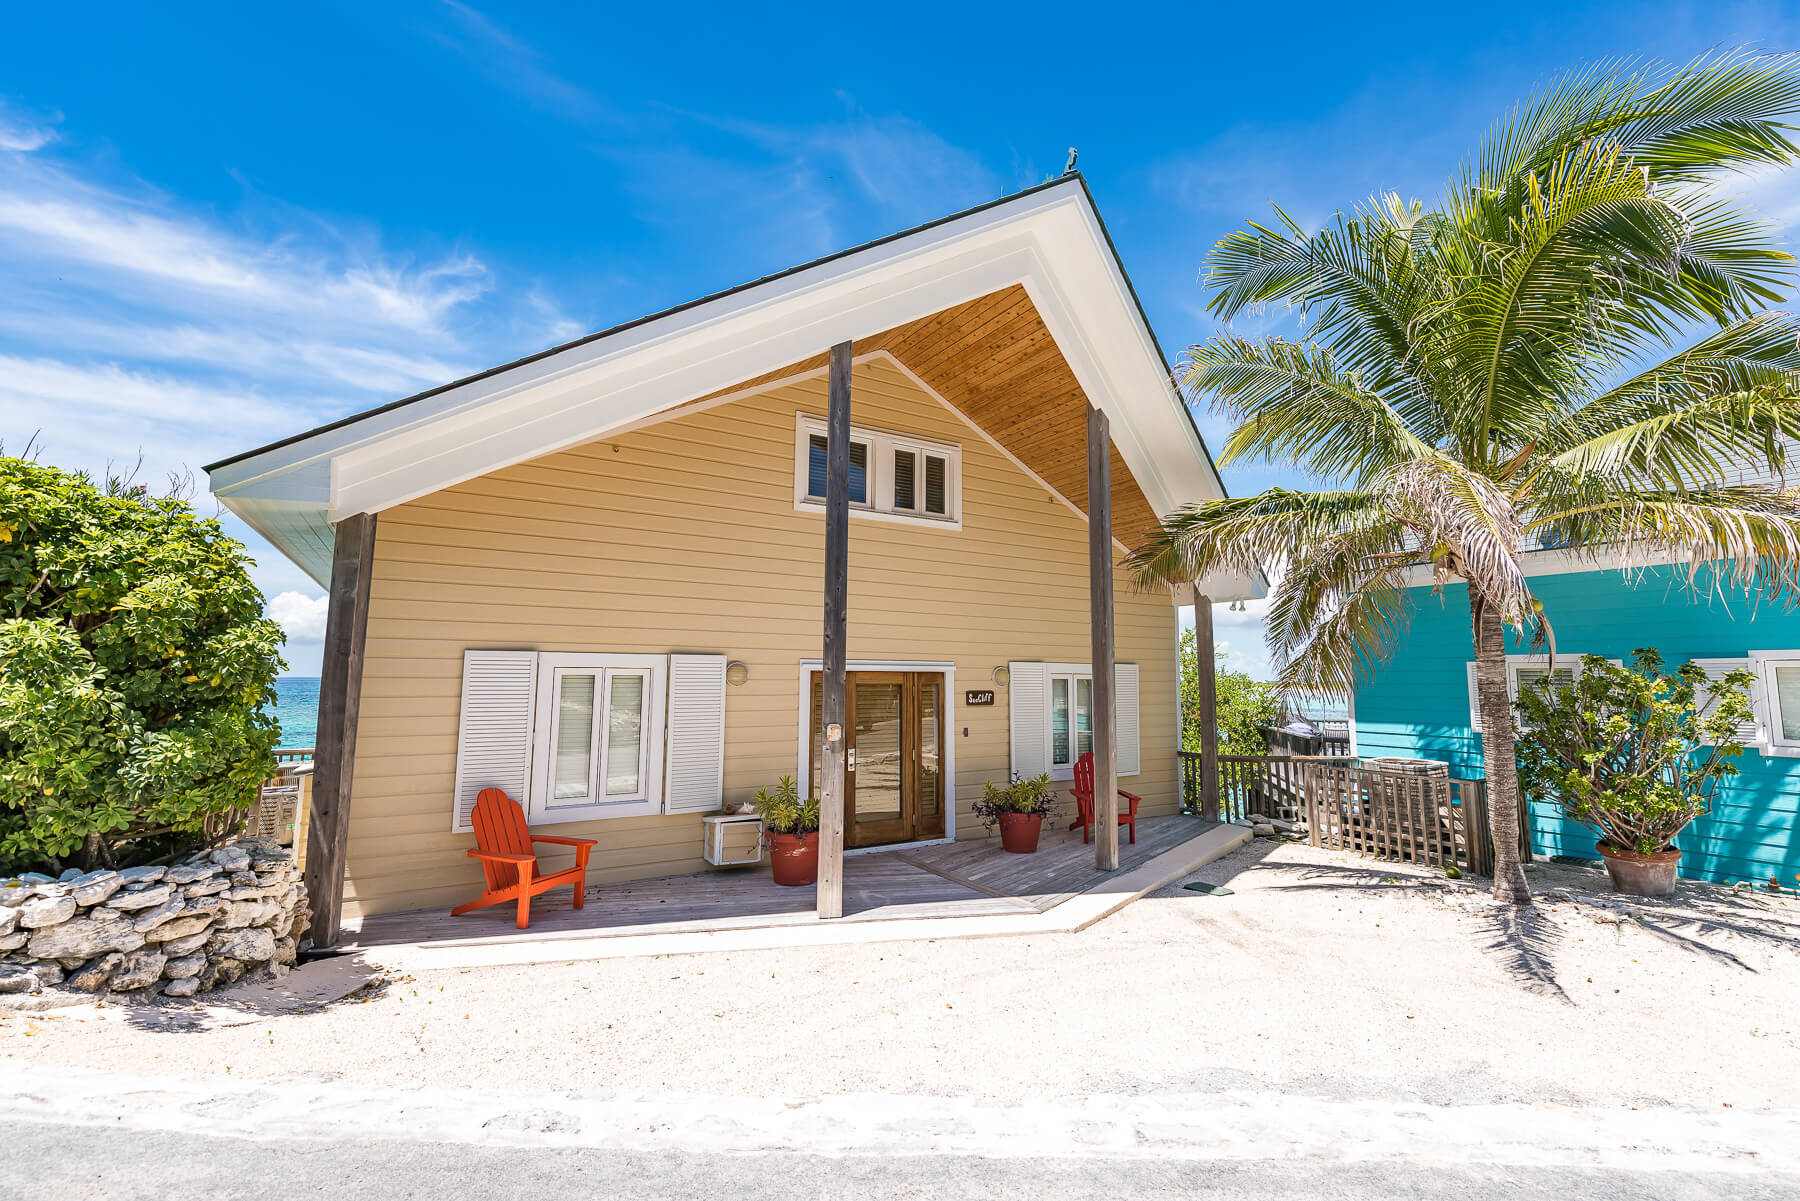 High class beachfront villa at The Abaco Club, showing the dream of upscale coastal living in the Bahamas.